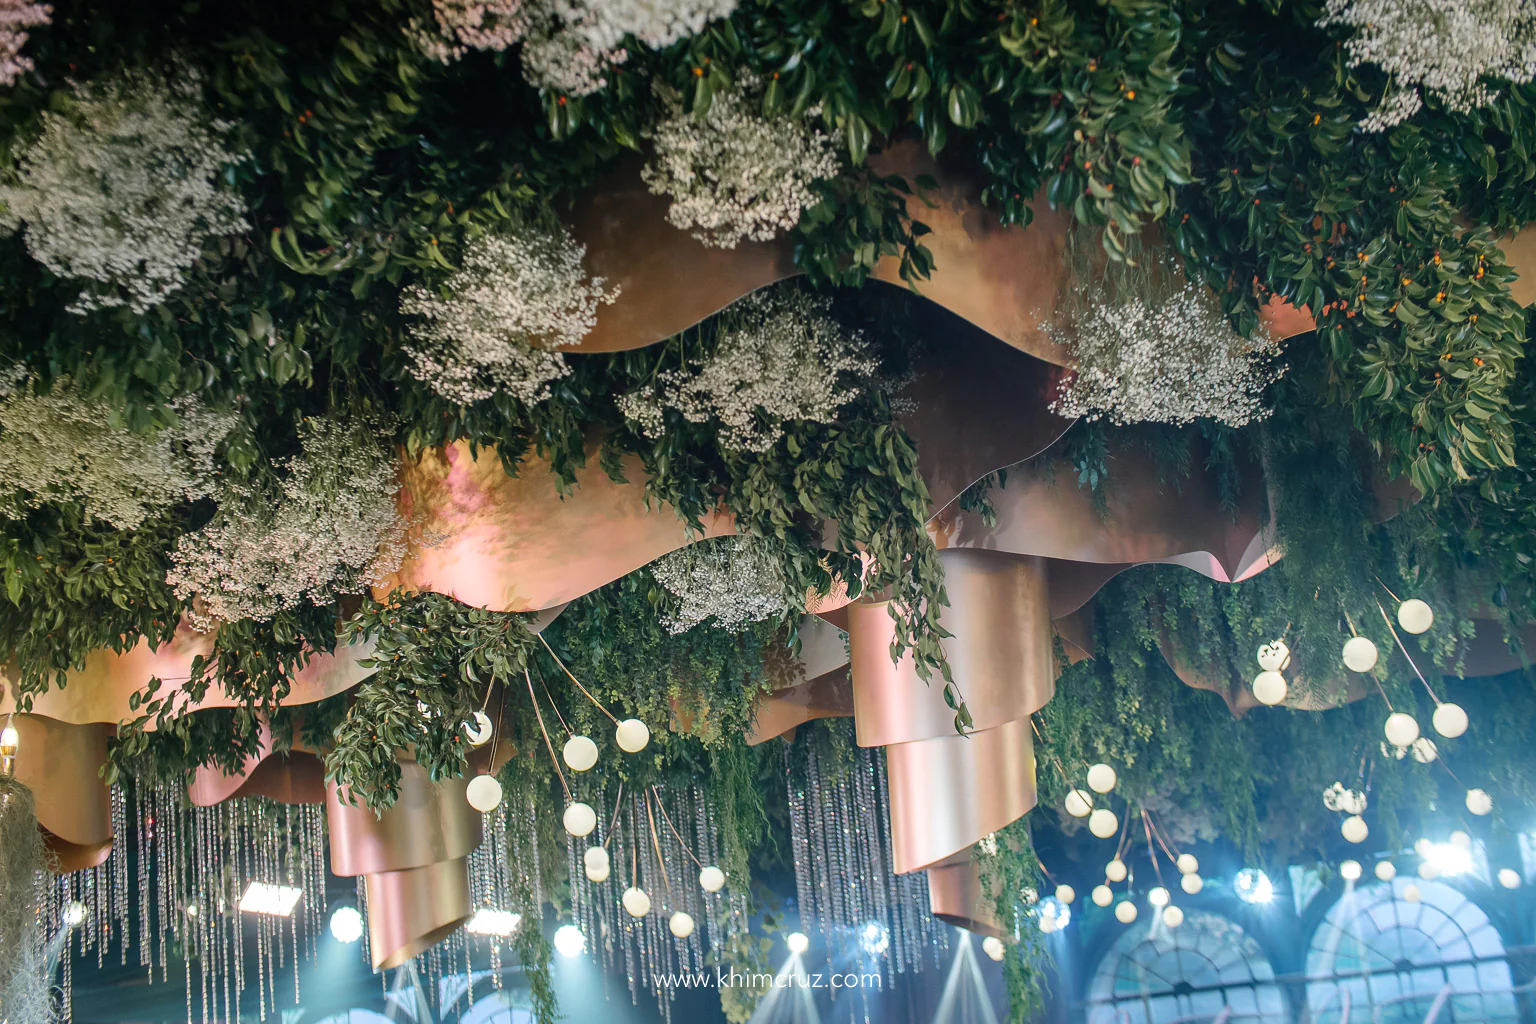 ceiling installation details with fresh gypsophilas for a dreamy conservatory-inspired wedding